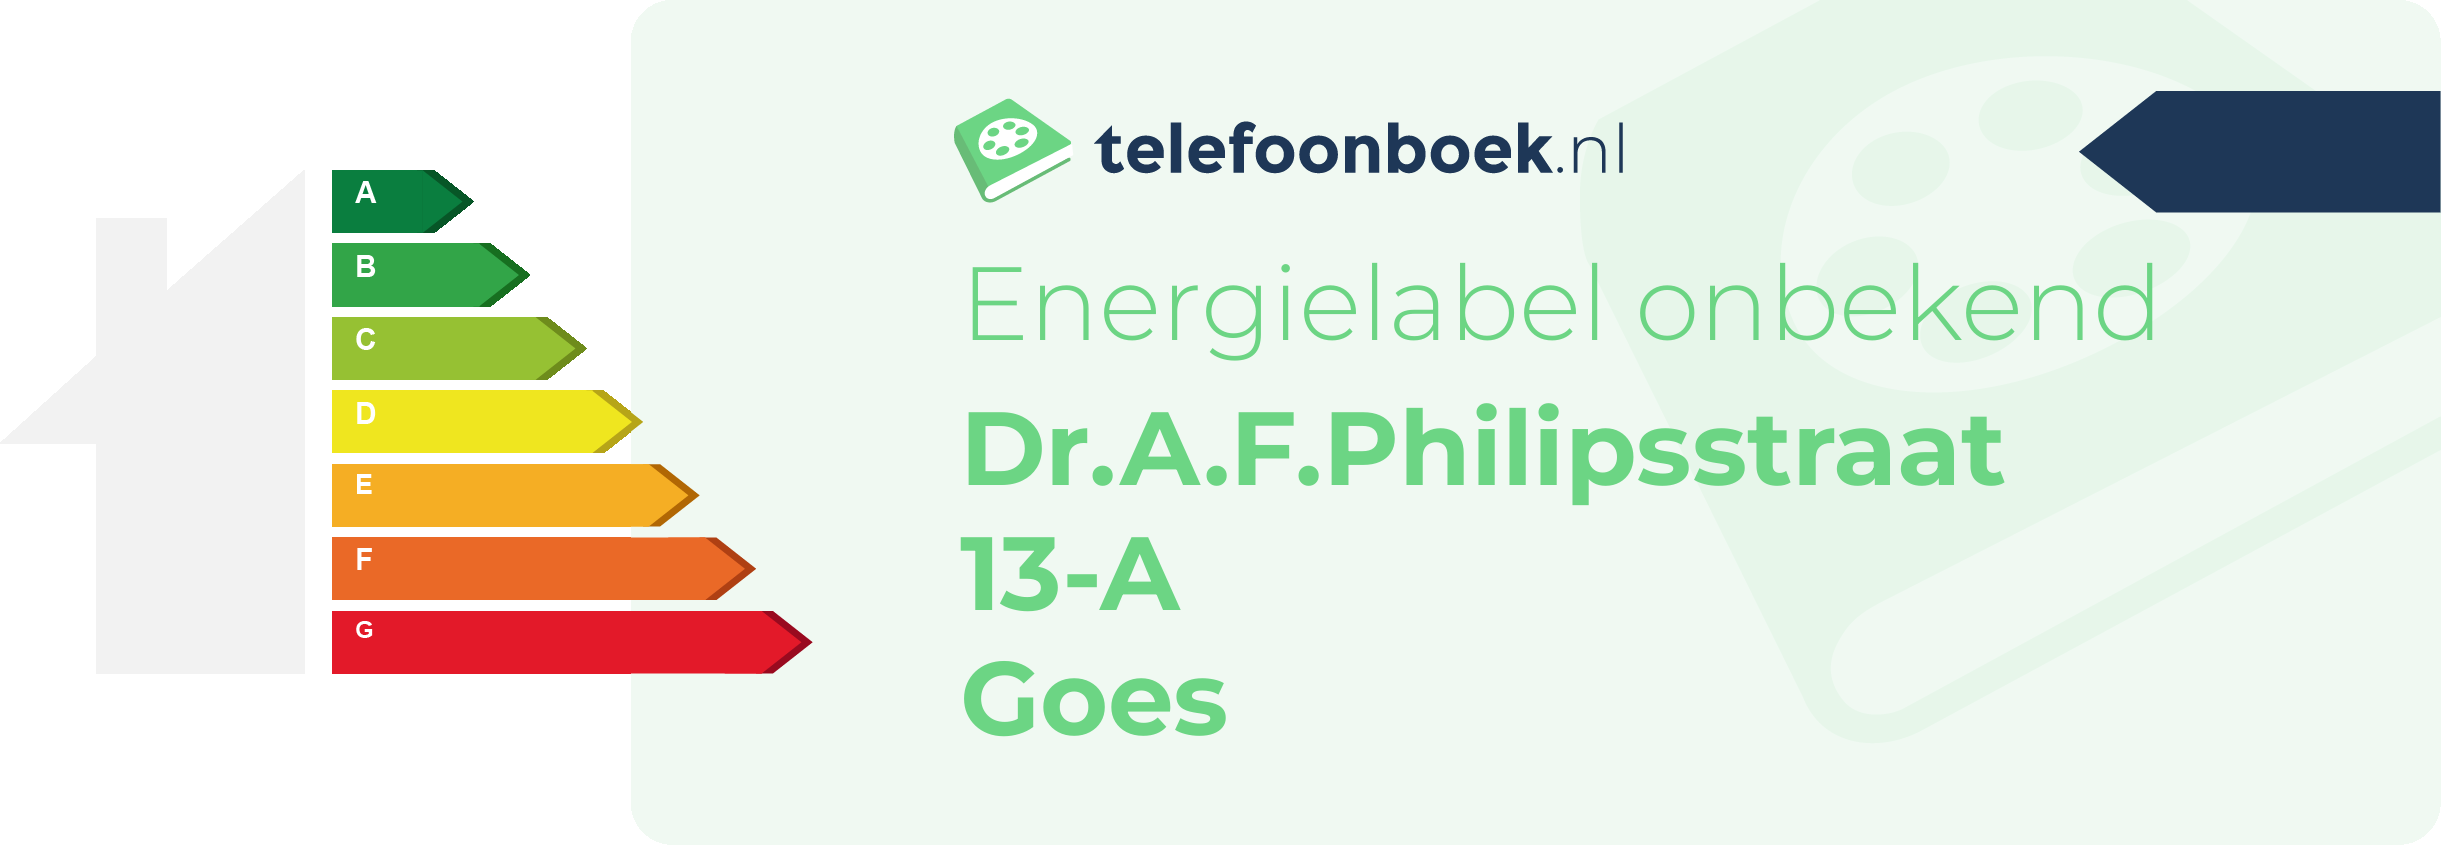 Energielabel Dr.A.F.Philipsstraat 13-A Goes